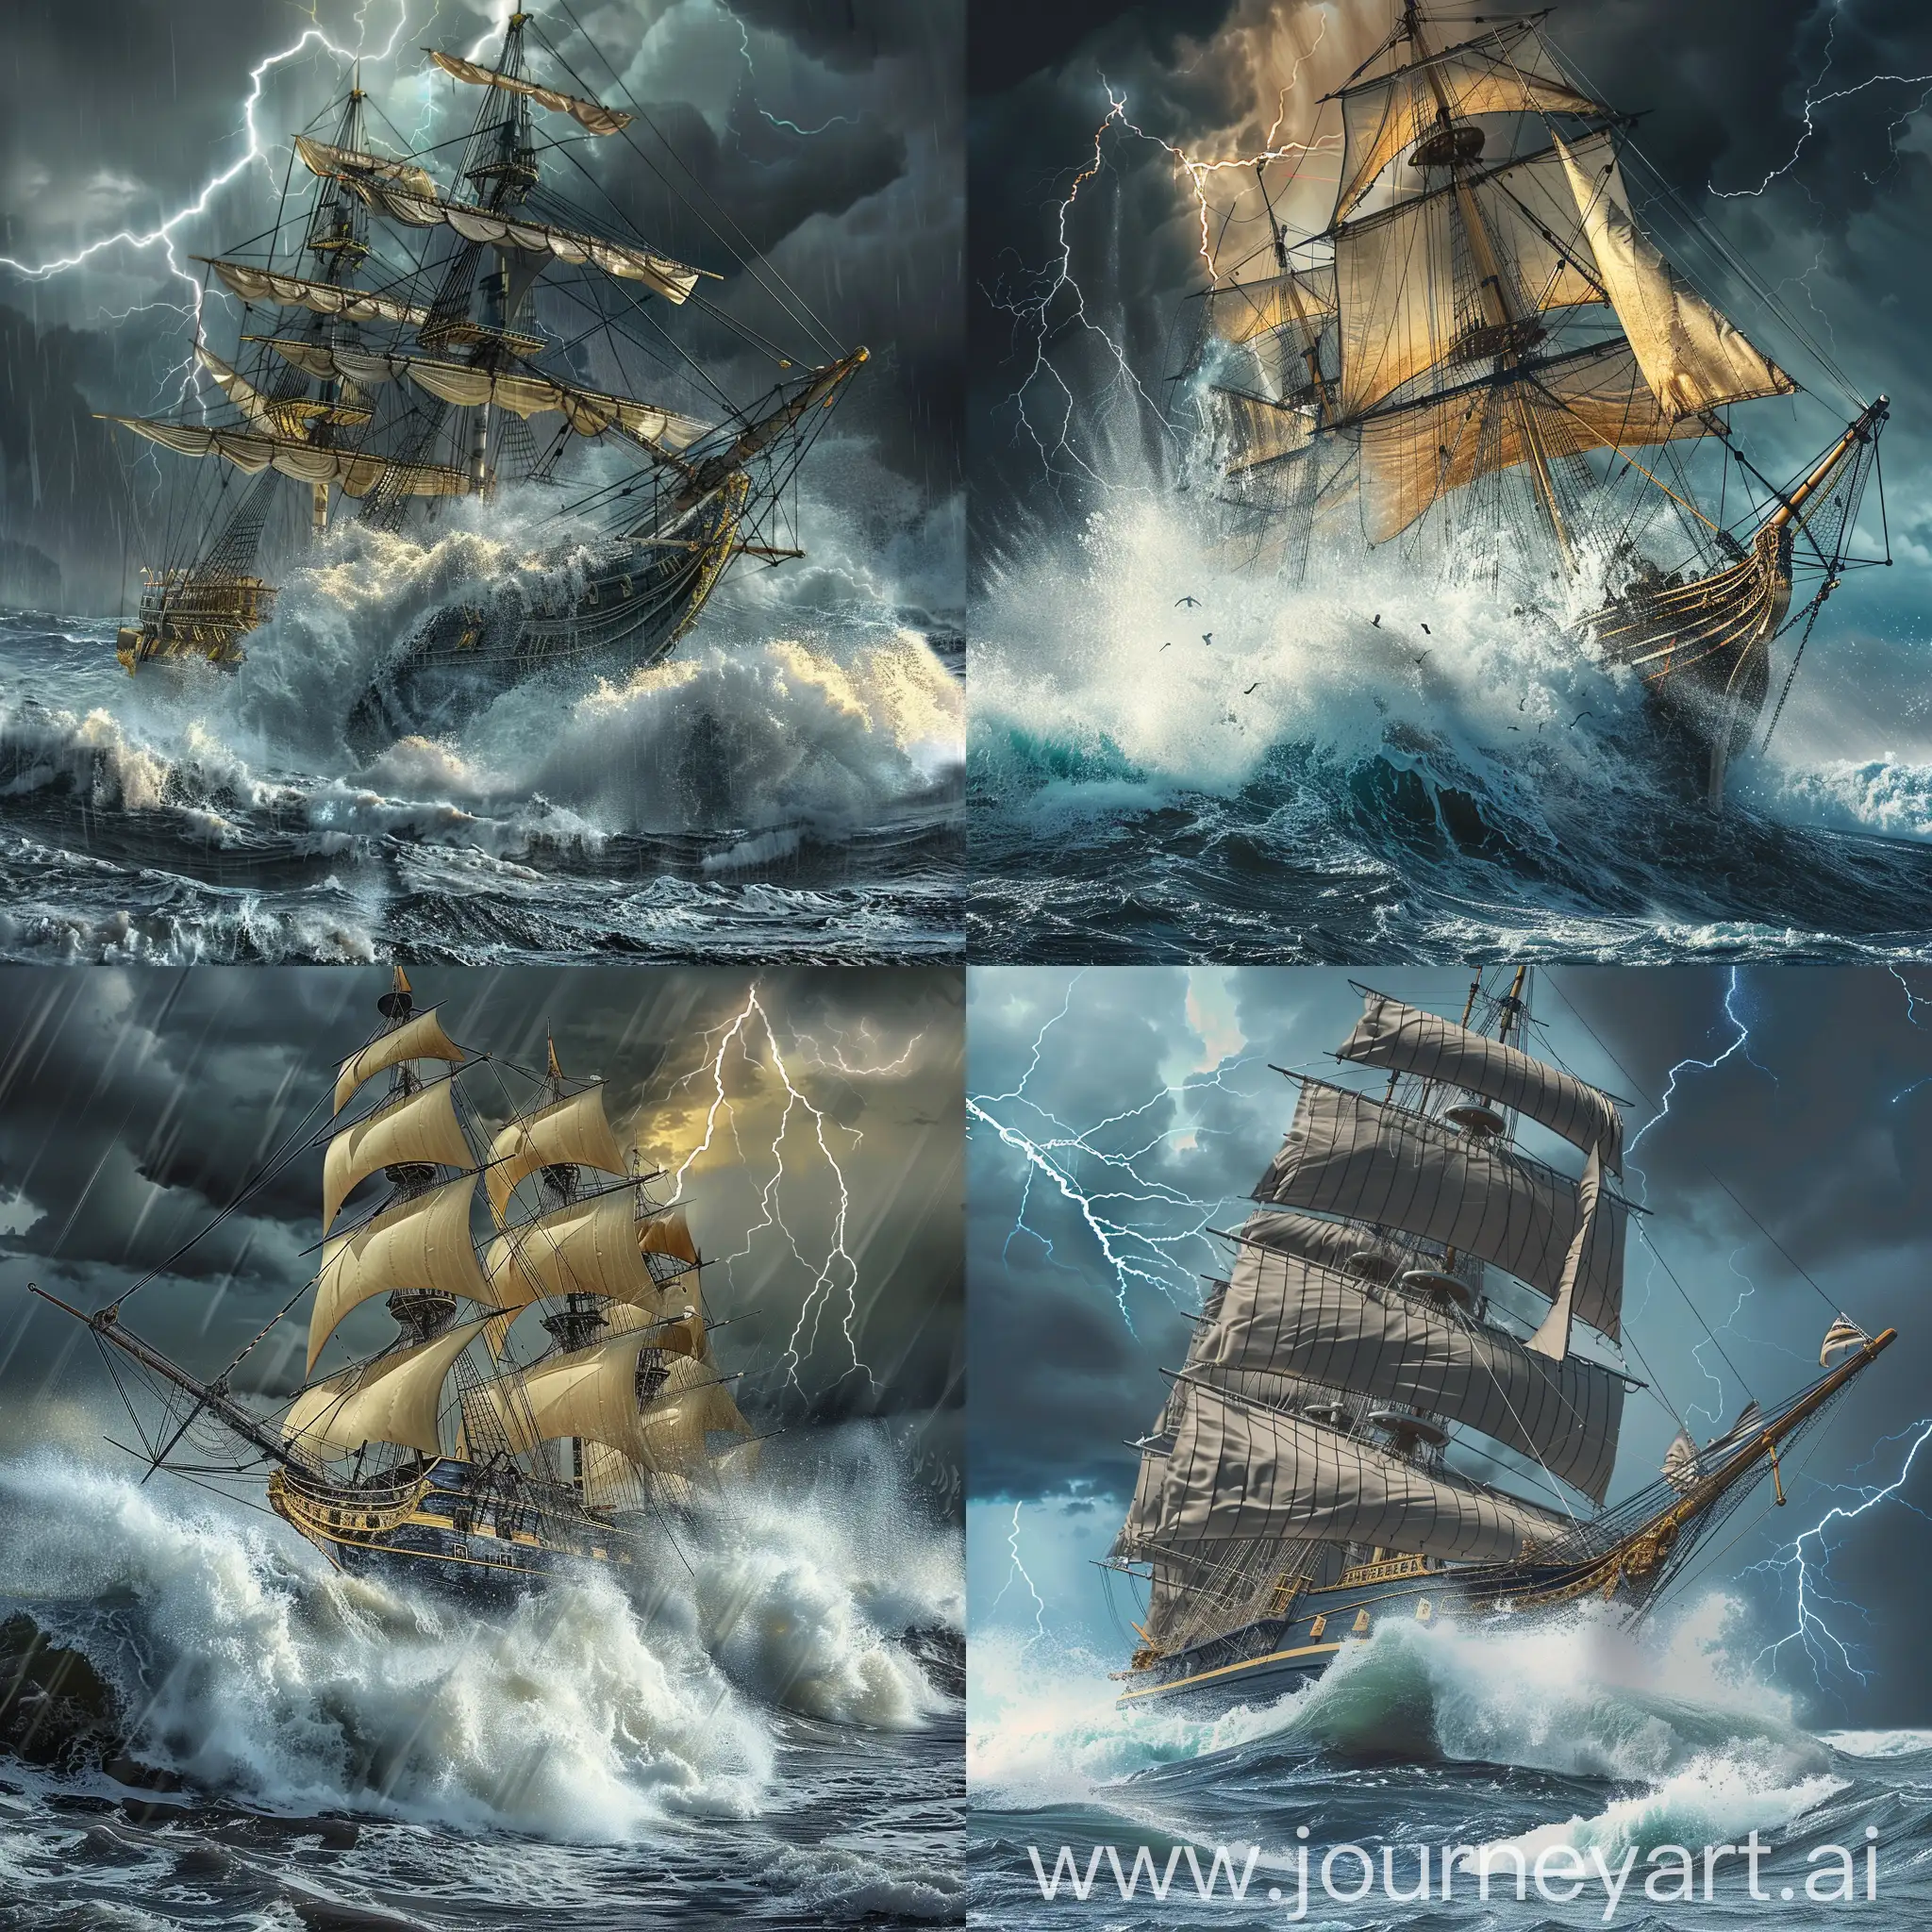 A large antique sailing ship in the middle of a gigantic ocean storm, meter-high waves crashing against the ship, lightning can be seen in the sky, dramatic, nostalgic and very detailed